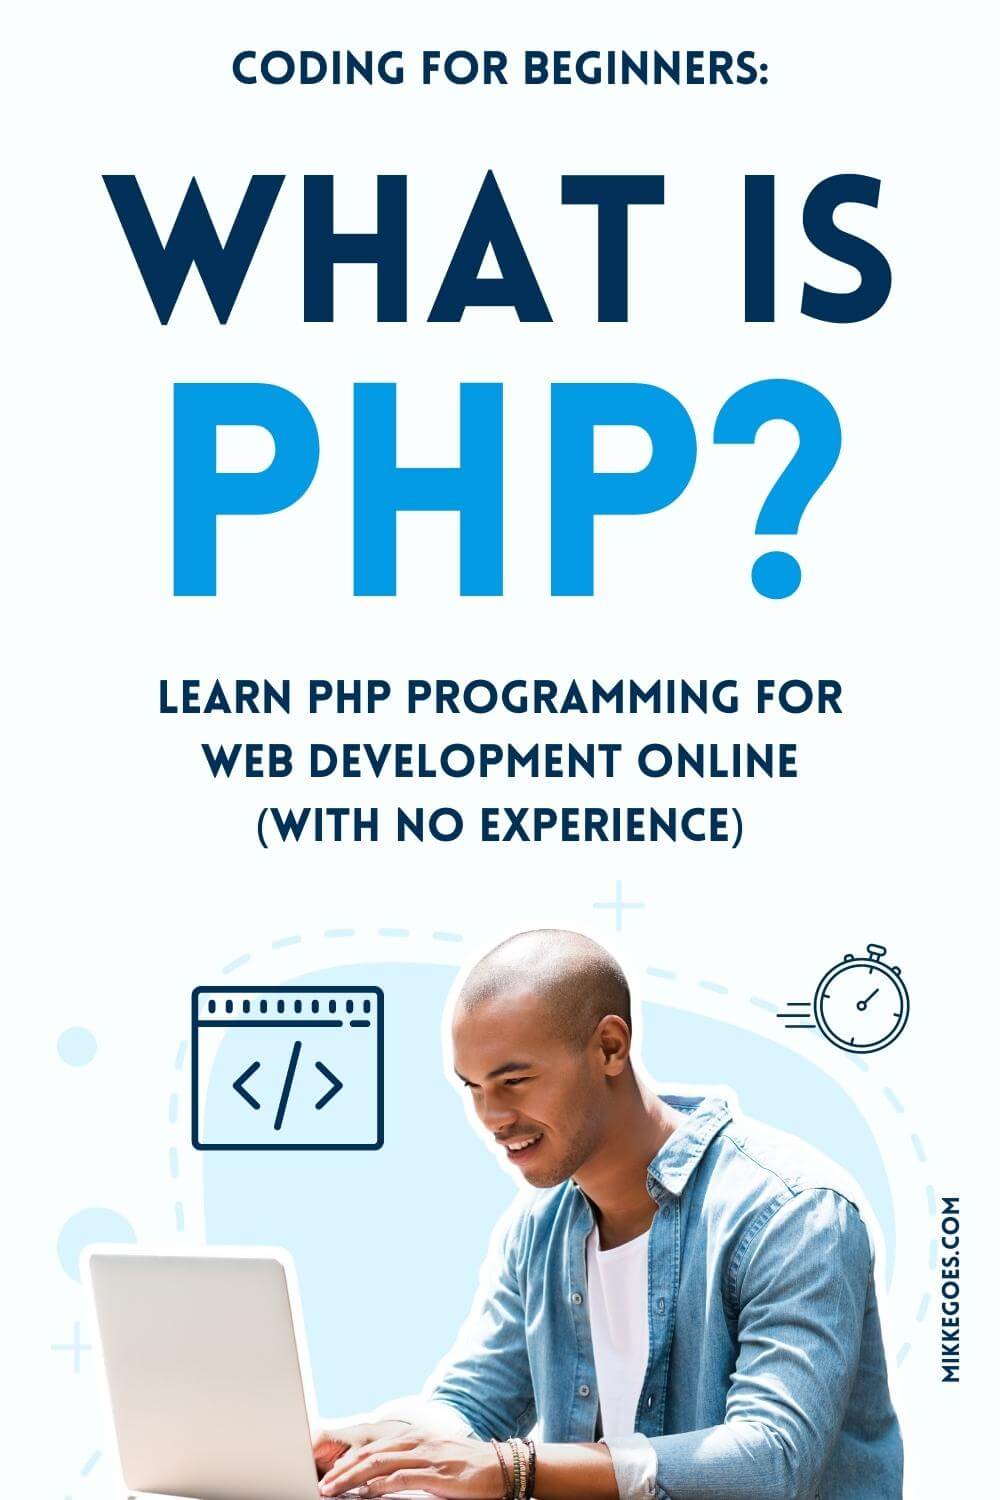 What is PHP, how it works and what PHP is used for – Free PHP guide for beginners